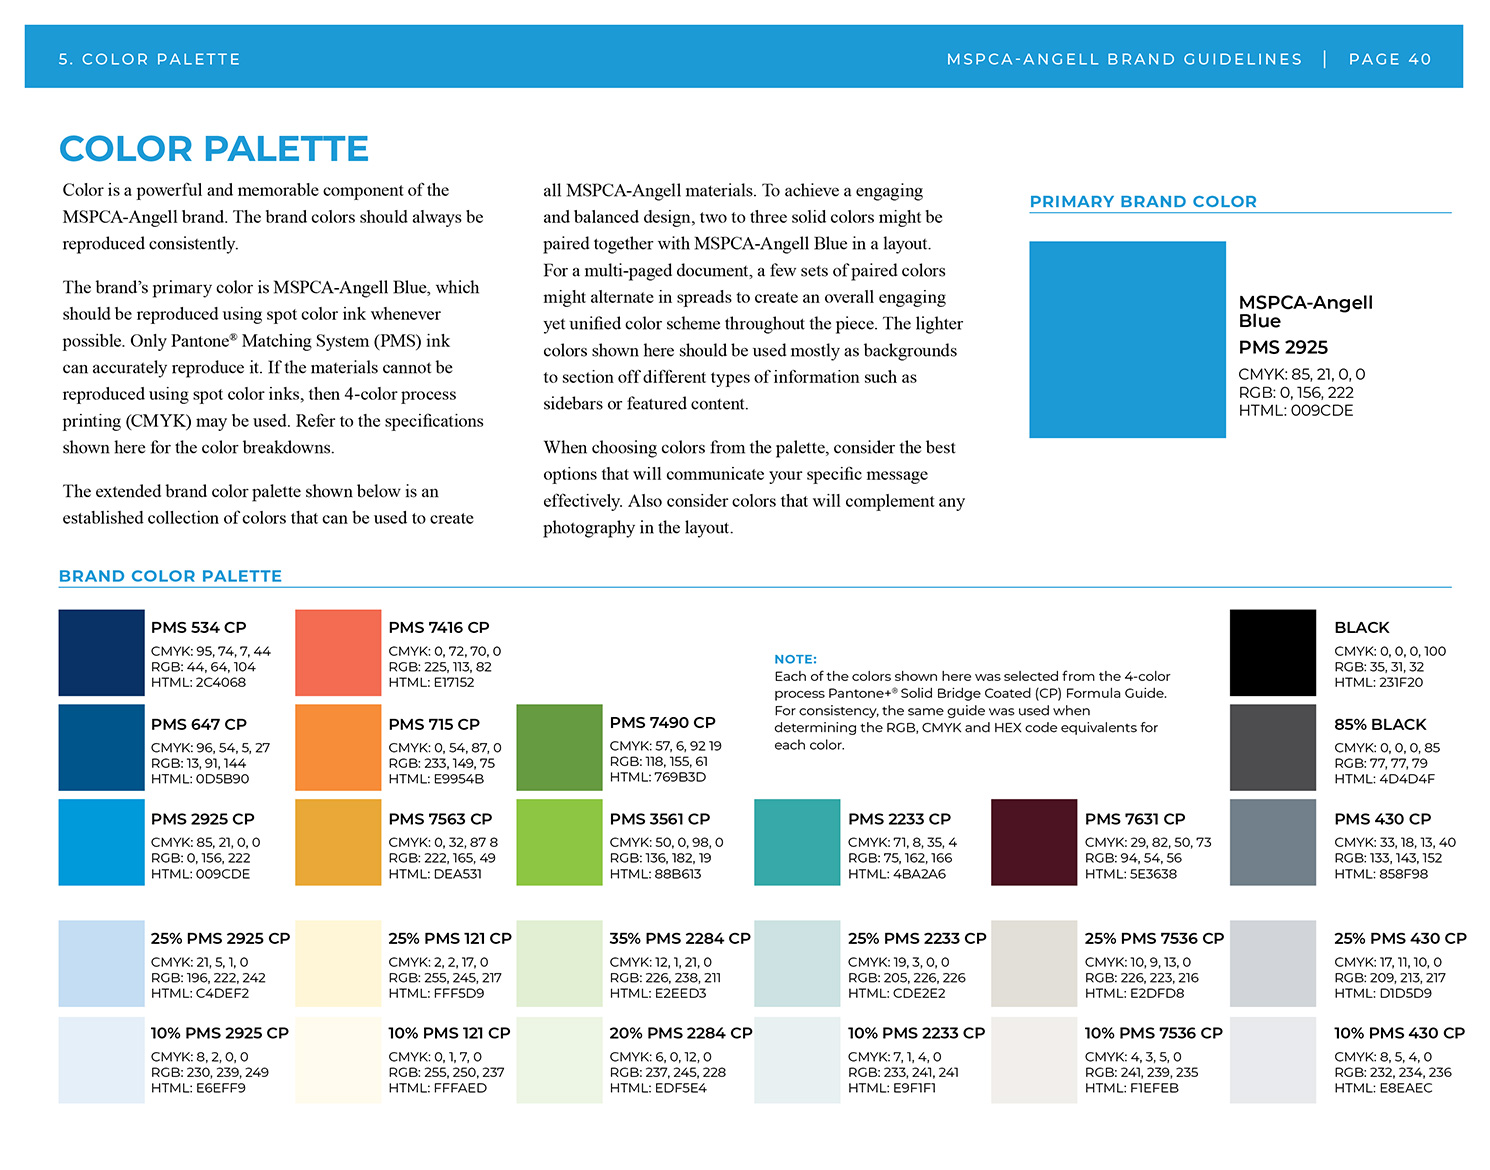 MSPCA-Angell brand guide color palette details